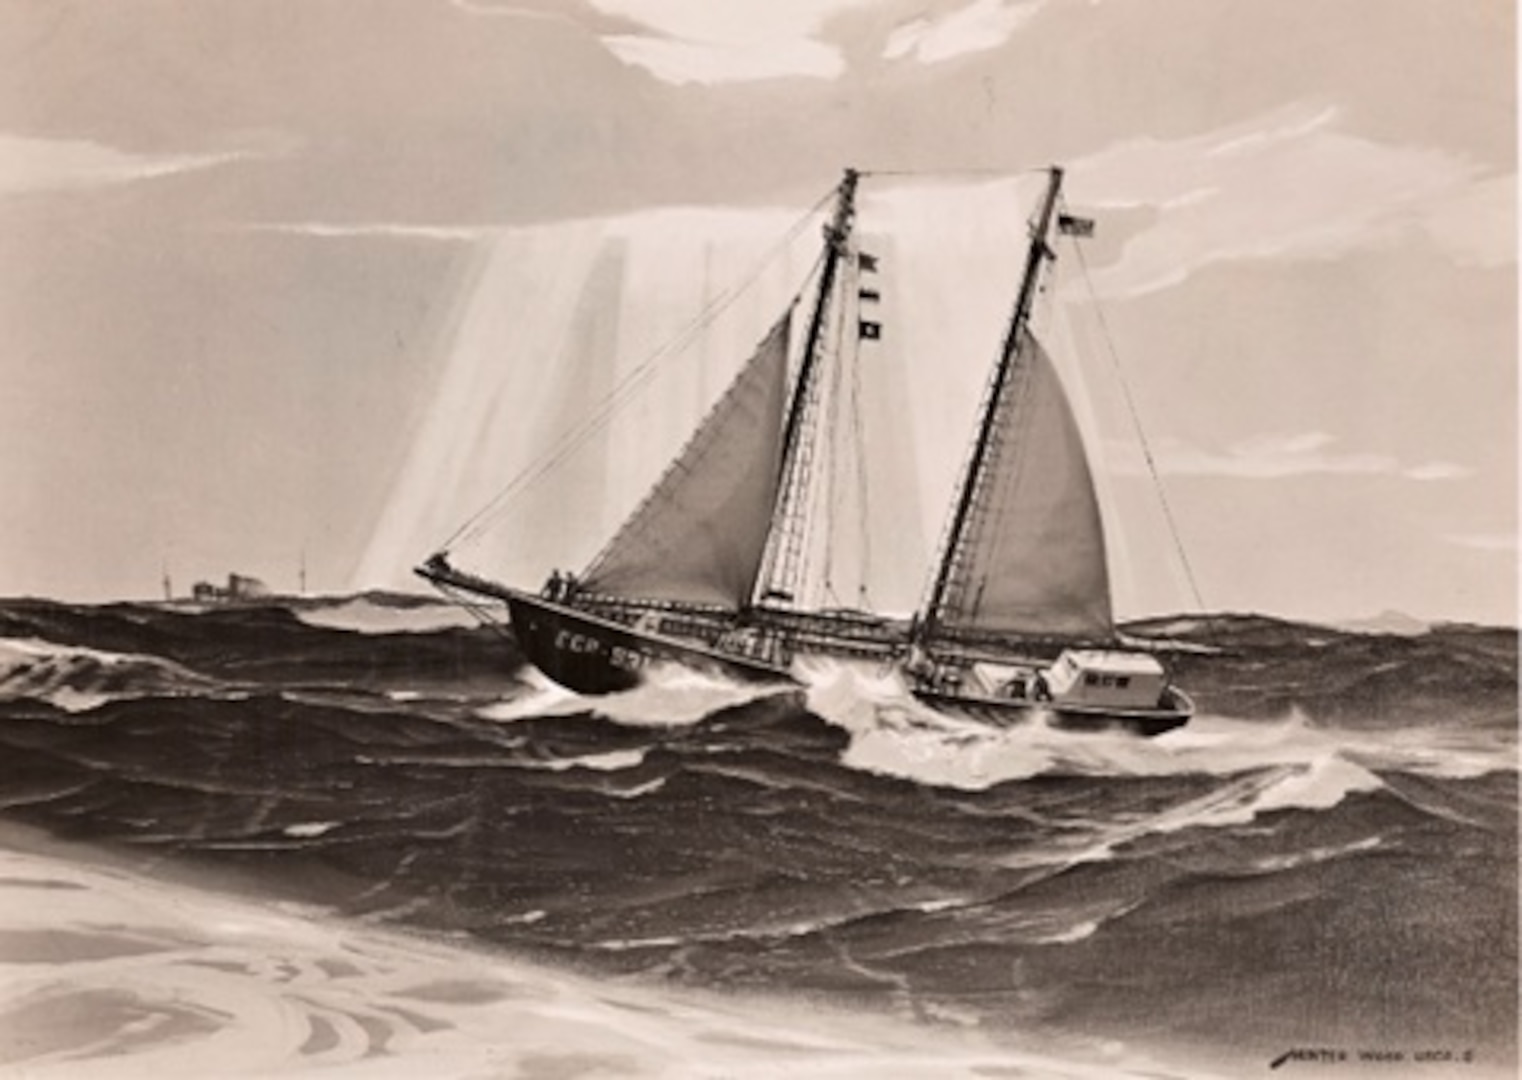 Photograph of oil painting title “Coast Guard Corsair on U-Boat Hunt,” which shows the Corsair Fleet Patrols off Newfoundland, by Coast Guard artist Hunter Wood. (National Archives and Records Administration, 205575915)